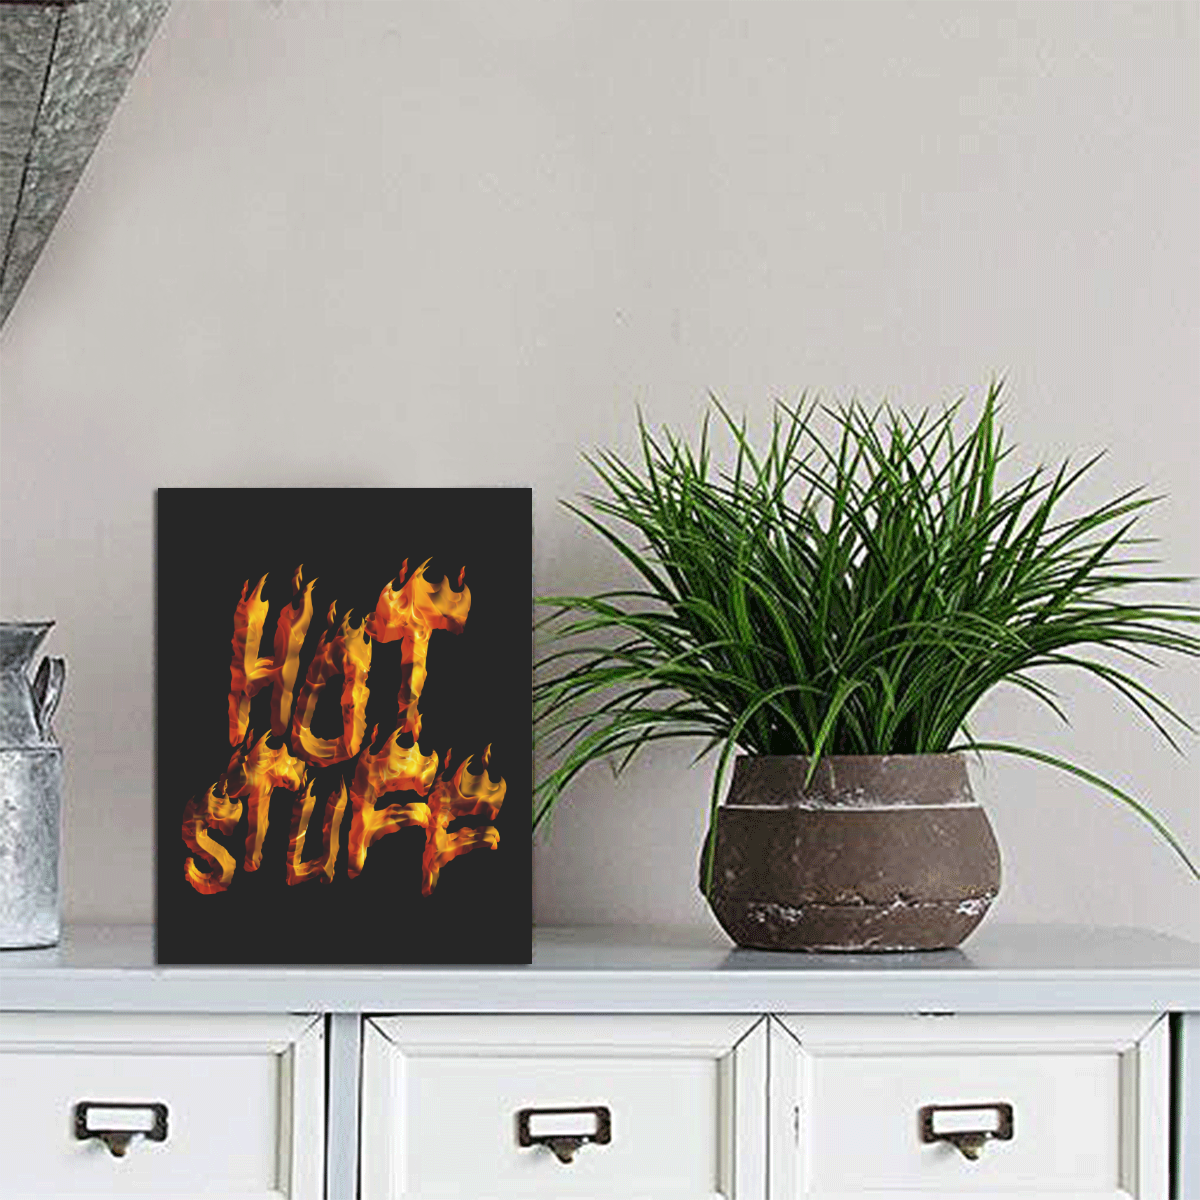 Flaming HOT STUFF Photo Panel for Tabletop Display 6"x8"